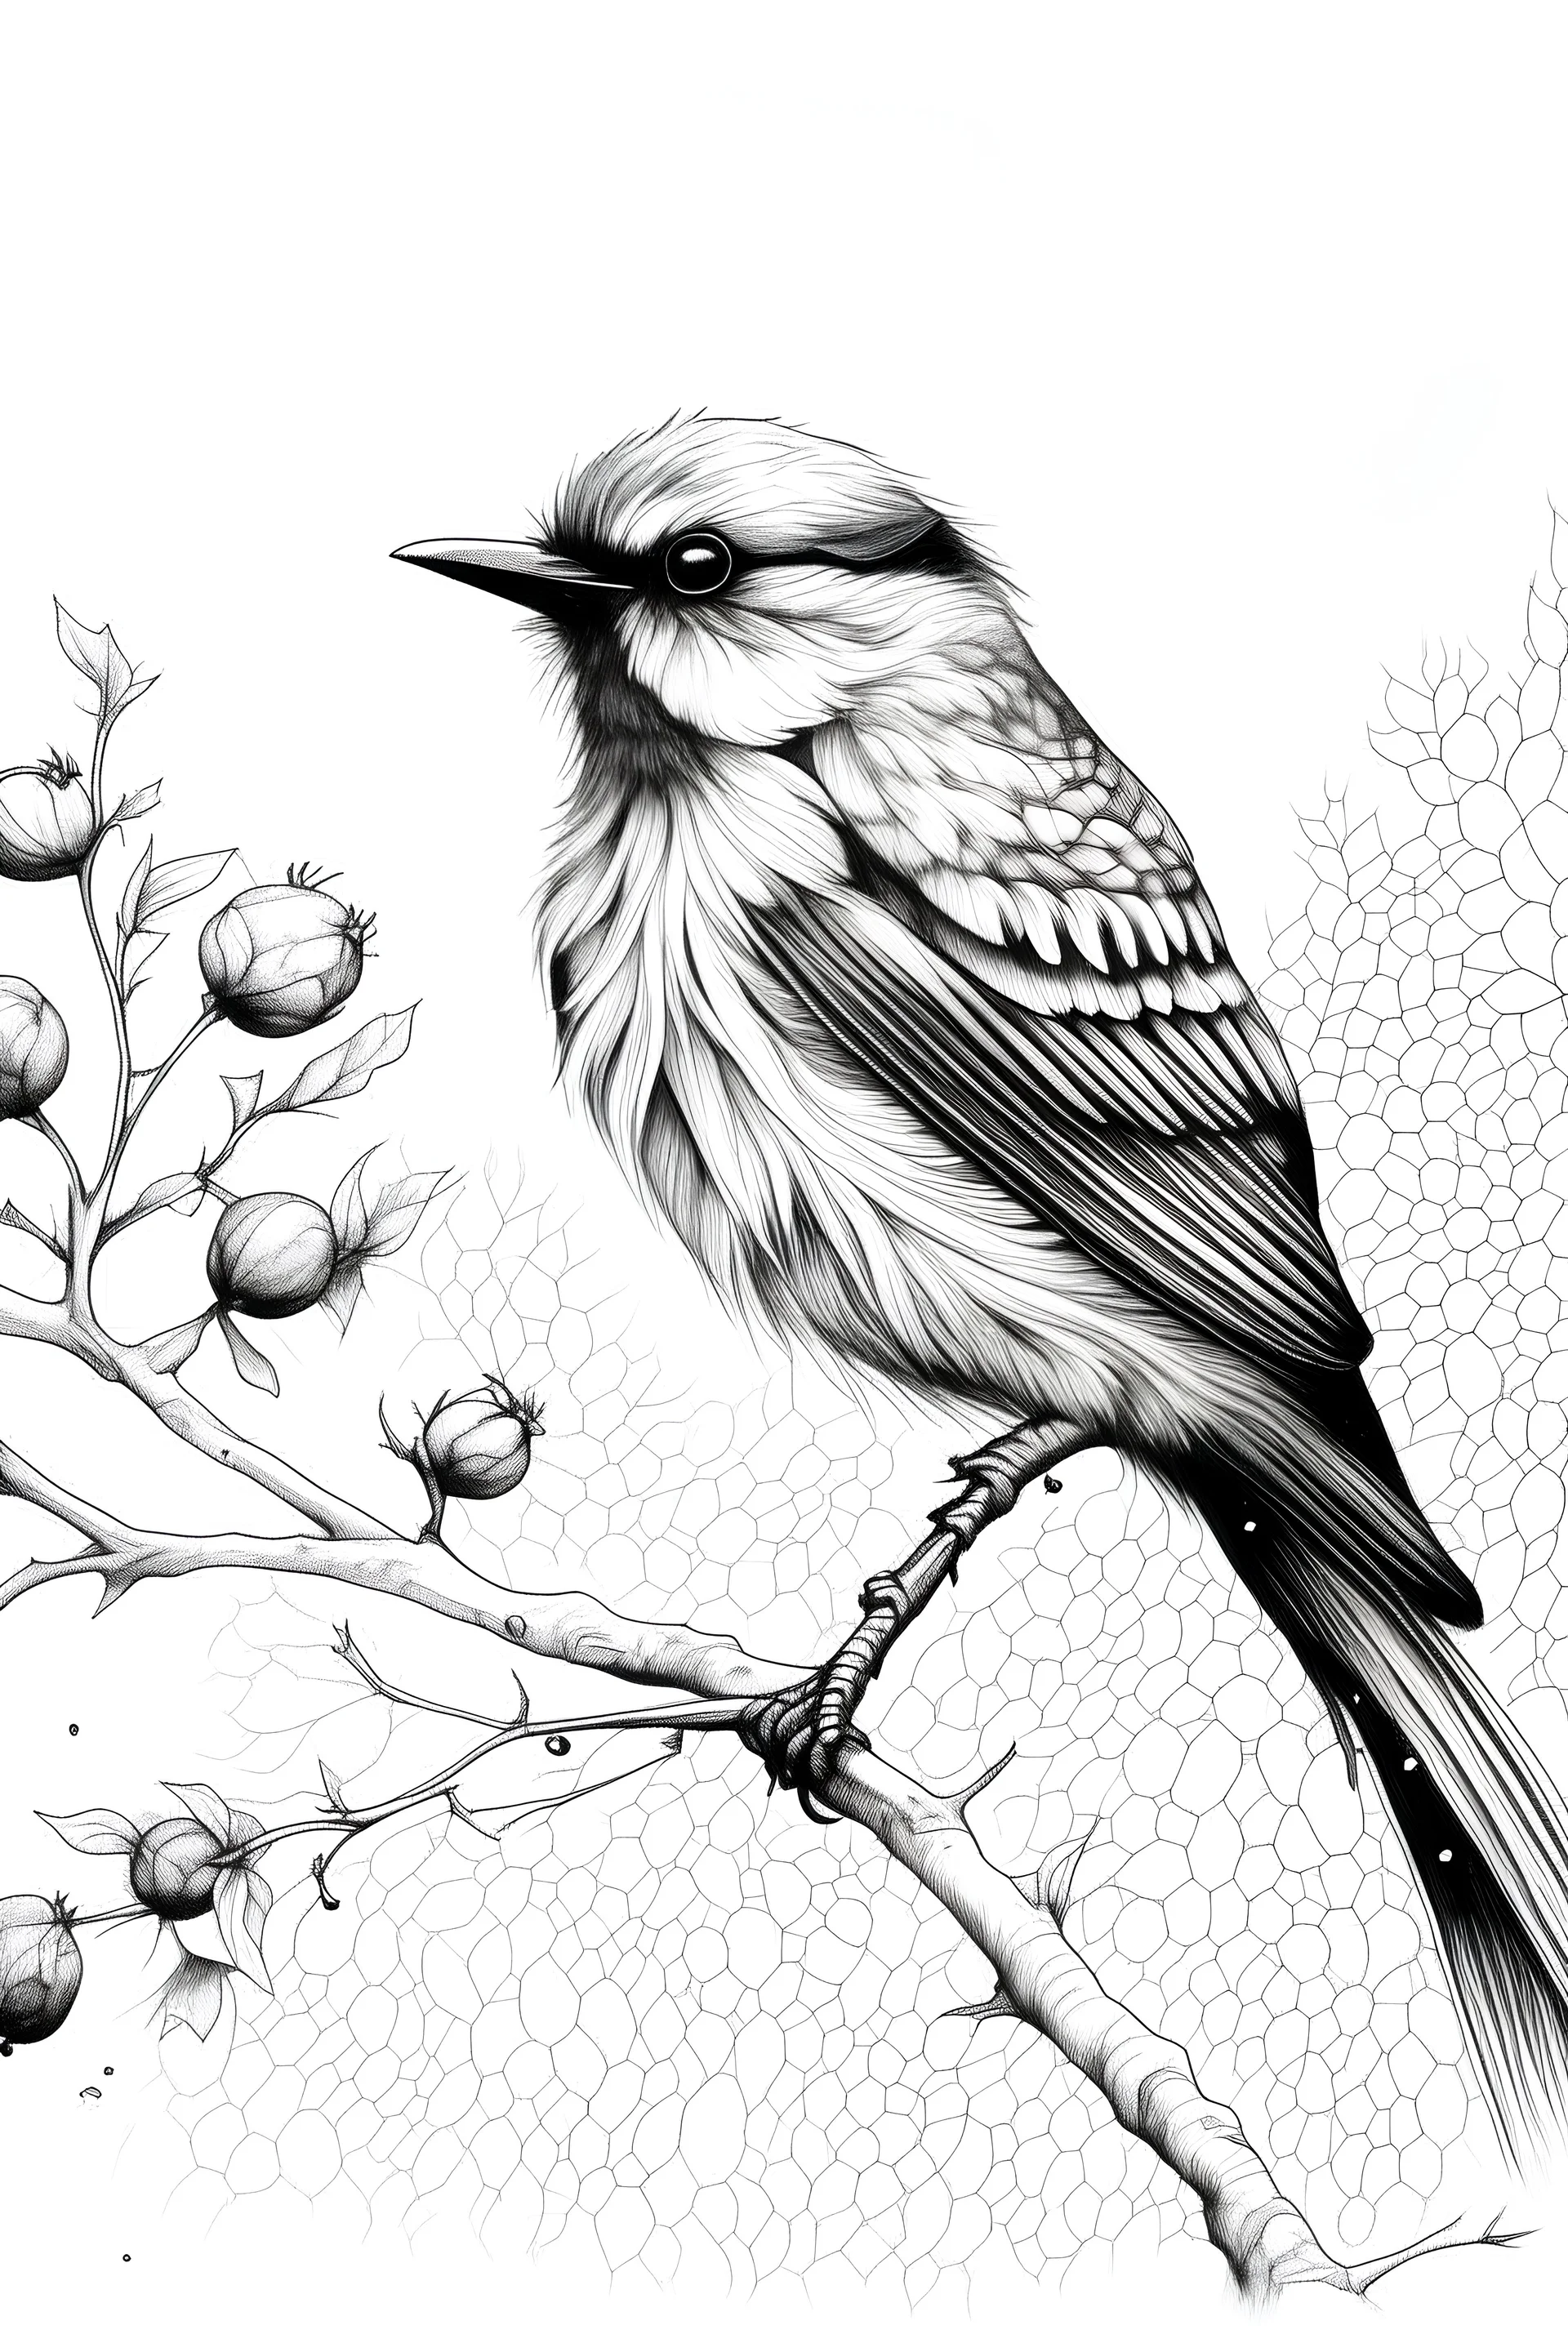 How to Draw a Chickadee : 7 Steps - Instructables